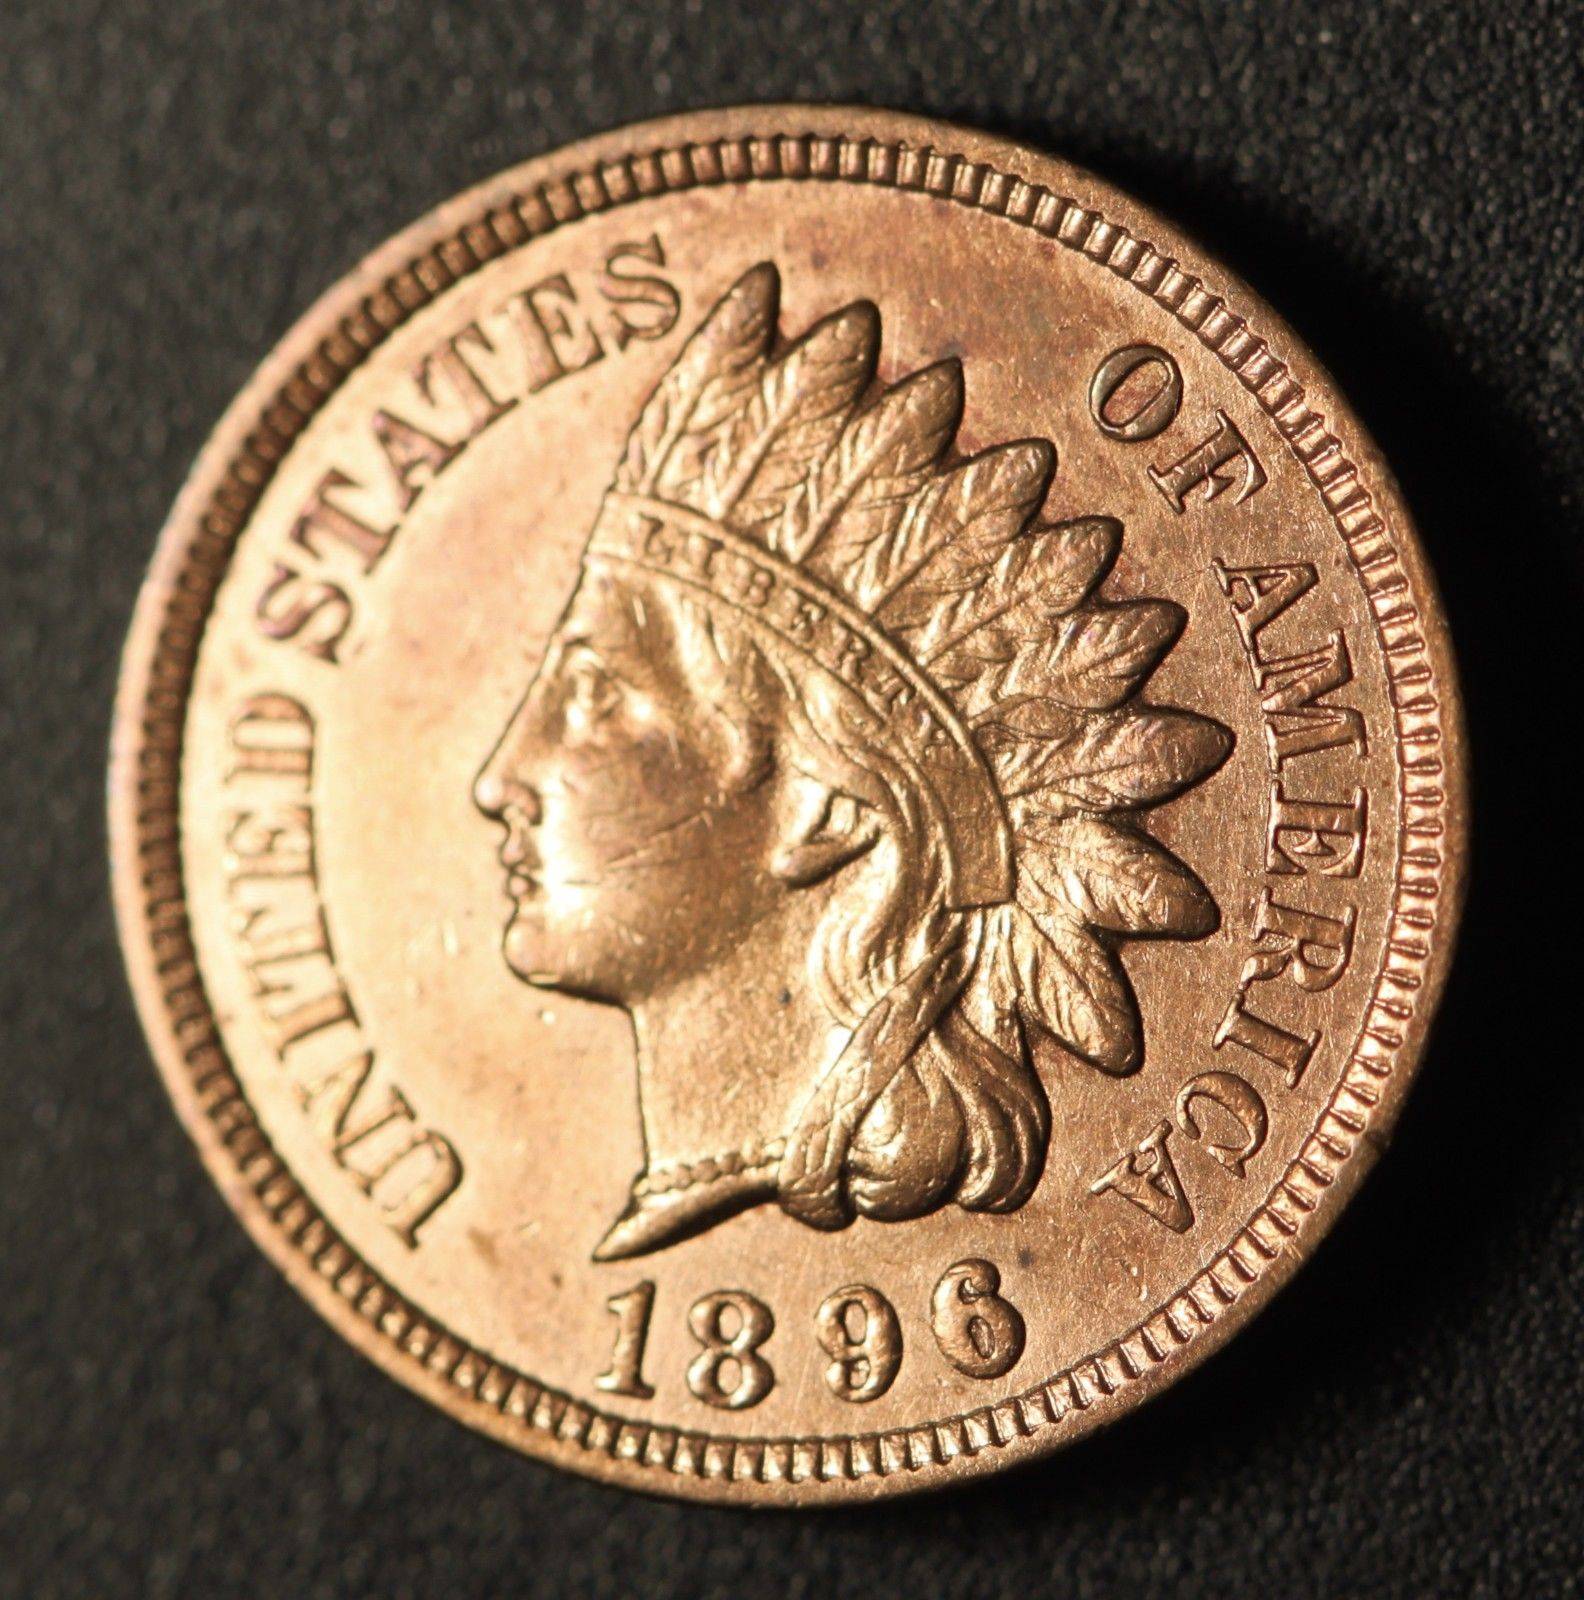 1896 RPD-022 - Indian Head Penny - Photo by Ed Nathanson